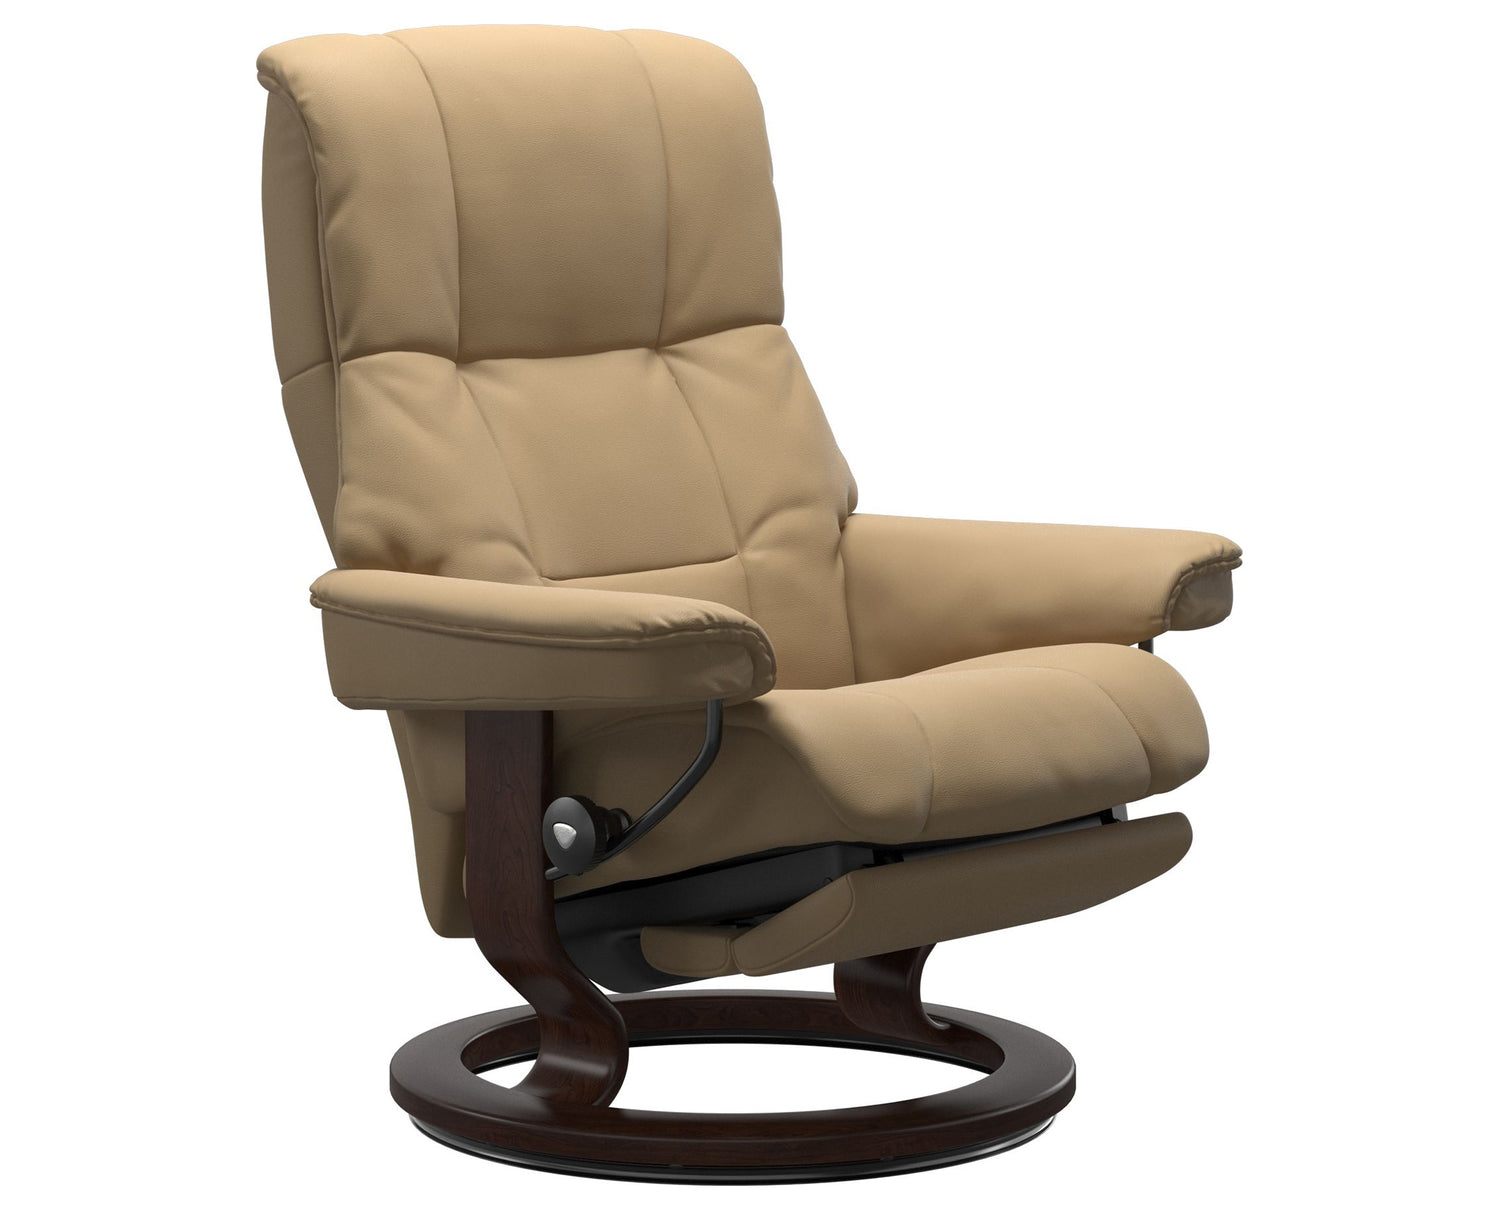 Paloma Leather Sand M/L & Brown Base | Stressless Mayfair Classic Power Recliner | Valley Ridge Furniture